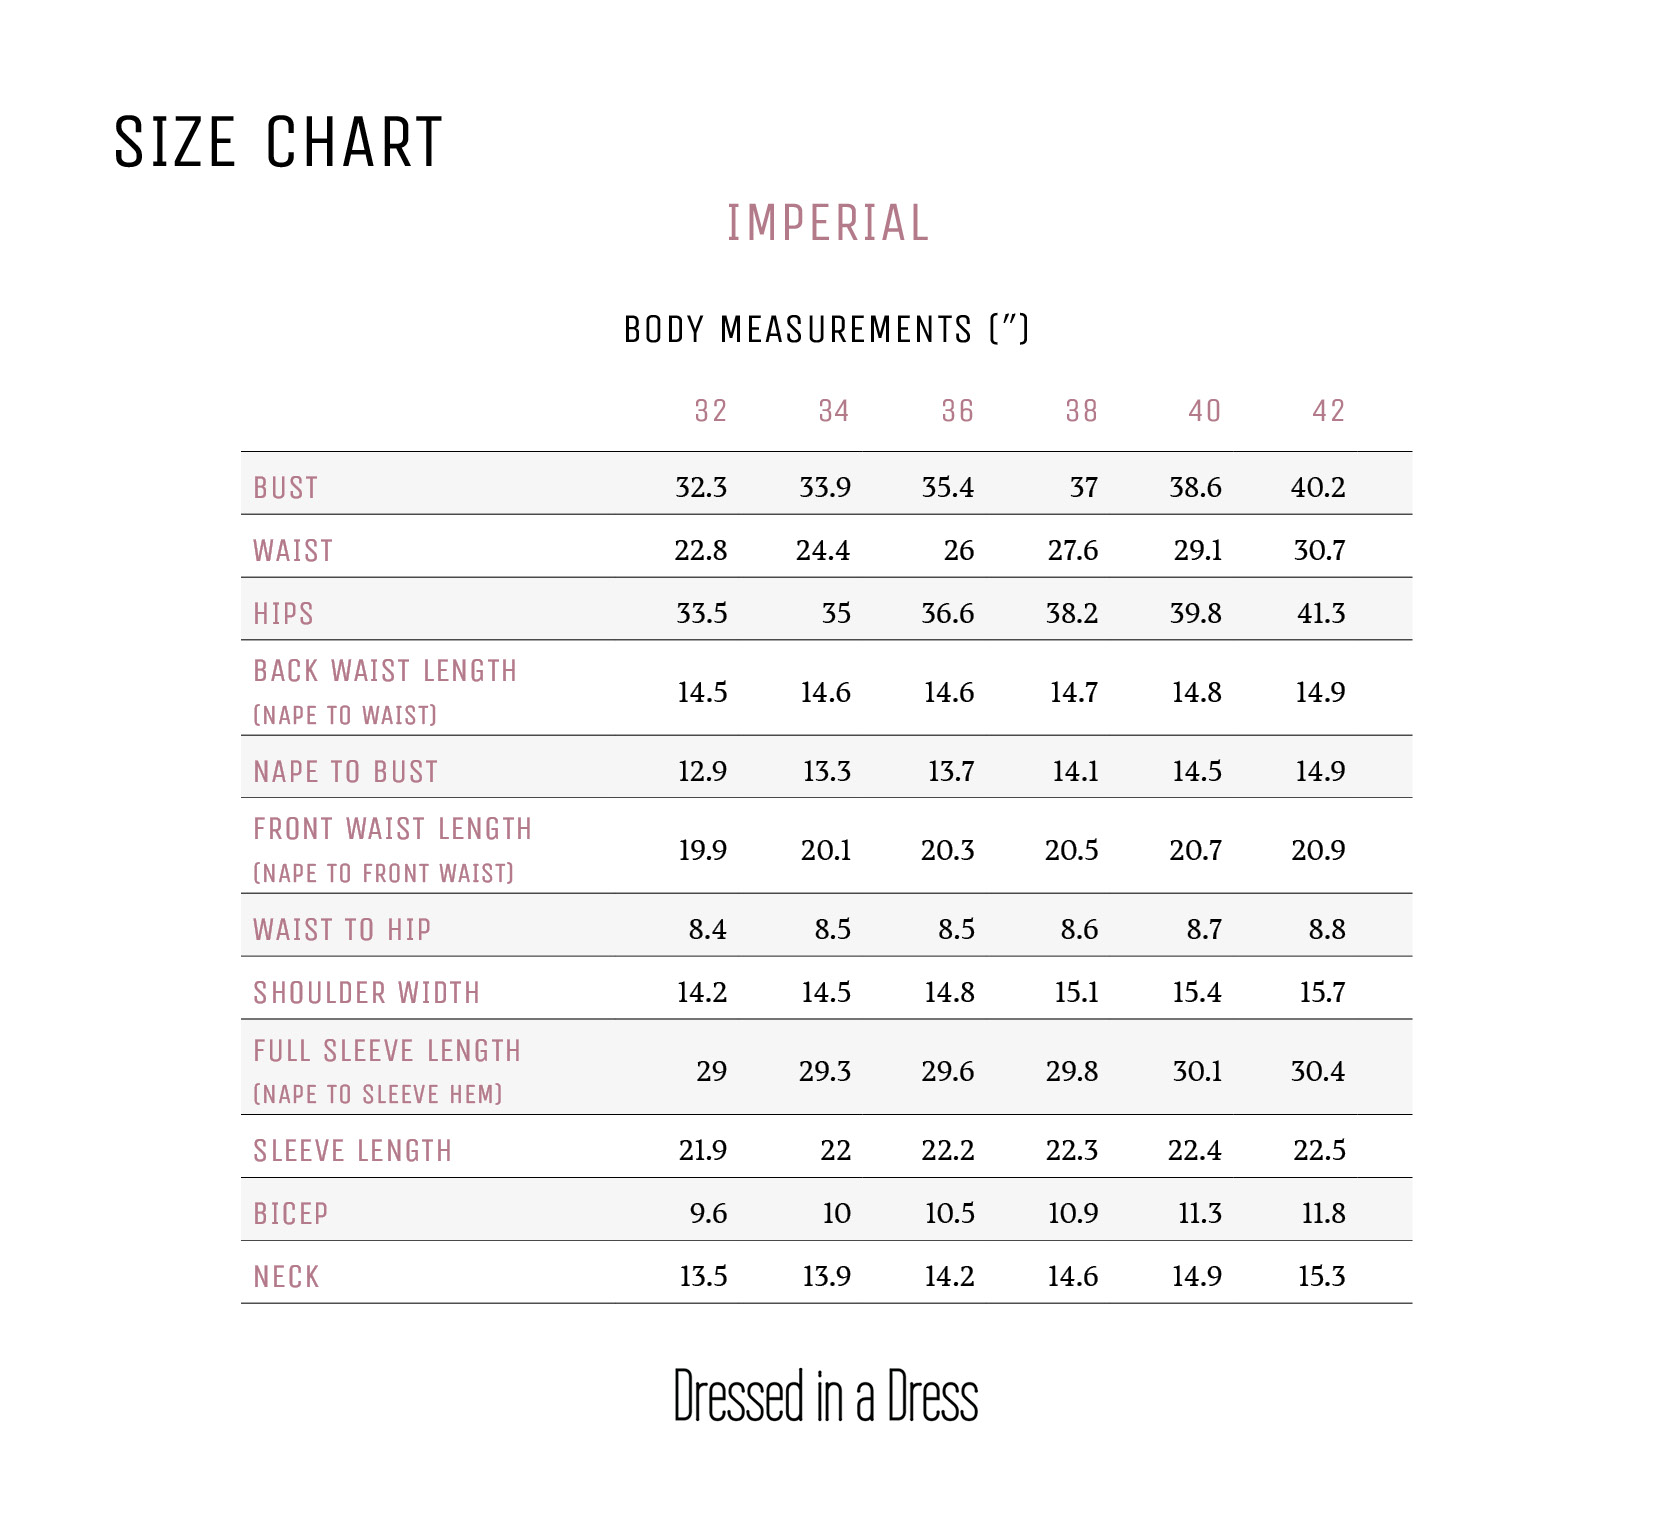 Dressed in a Dress Size Chart—Imperial